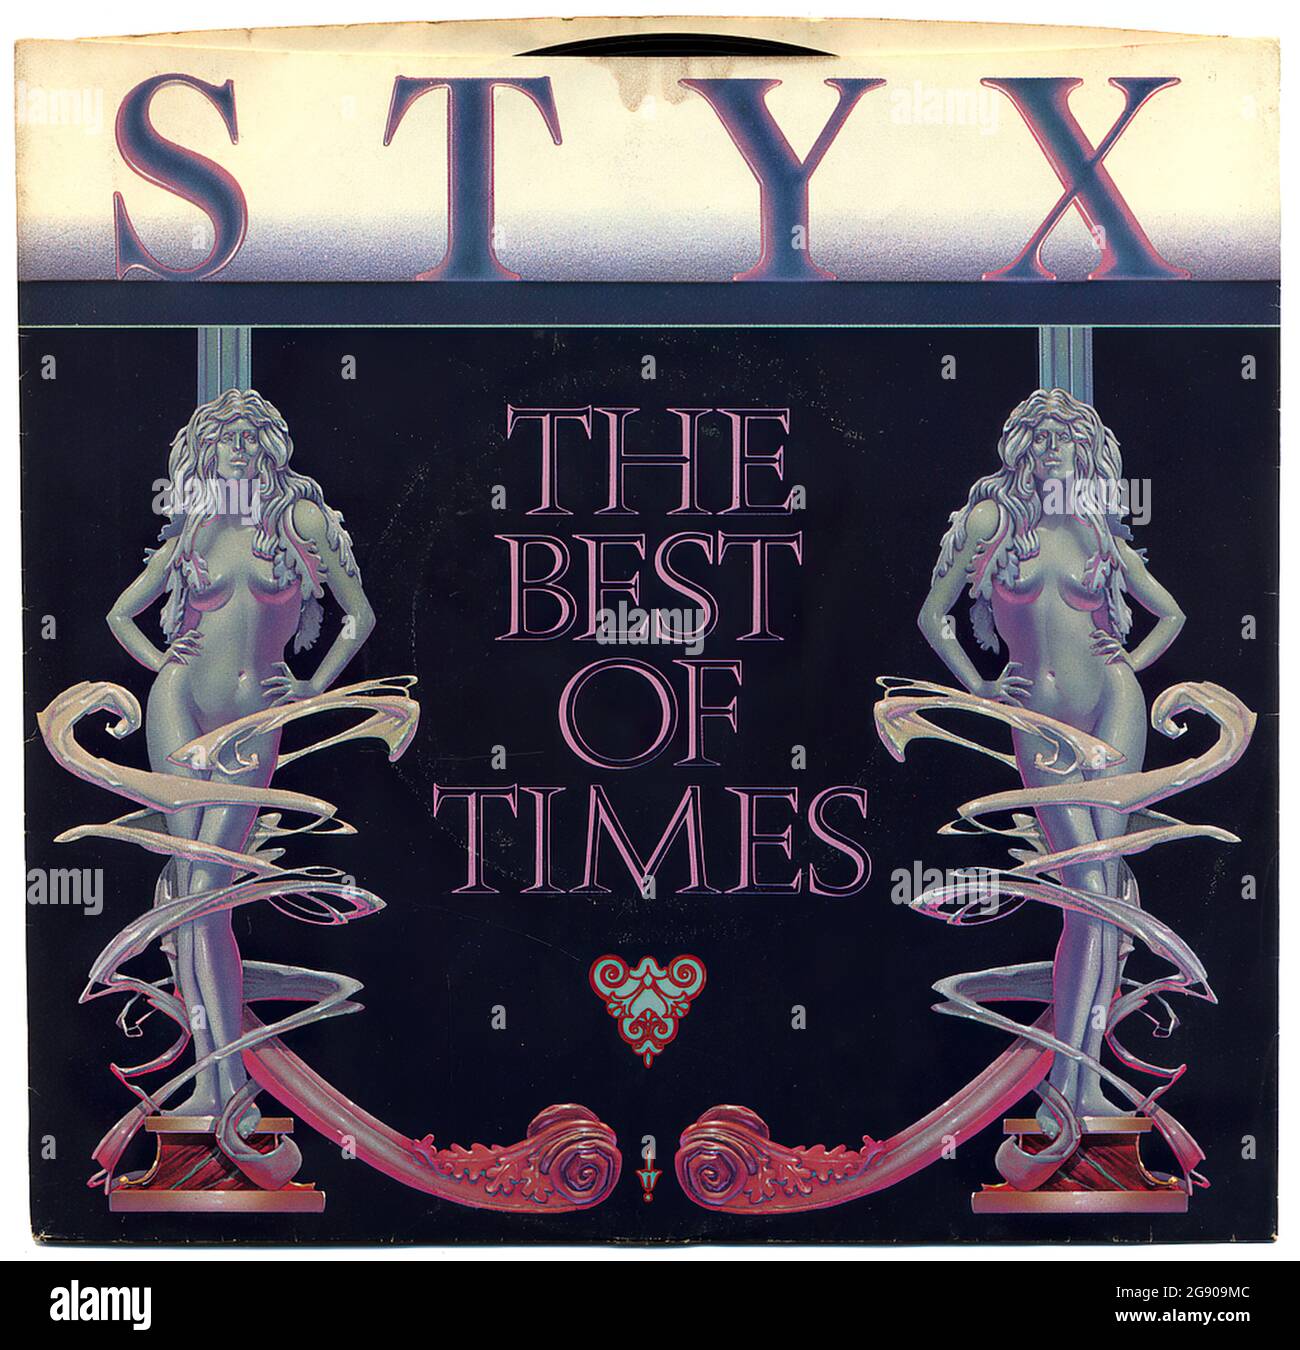 The Best Of Times, Styx - Vintage Vinyl Record Cover Stock Photo